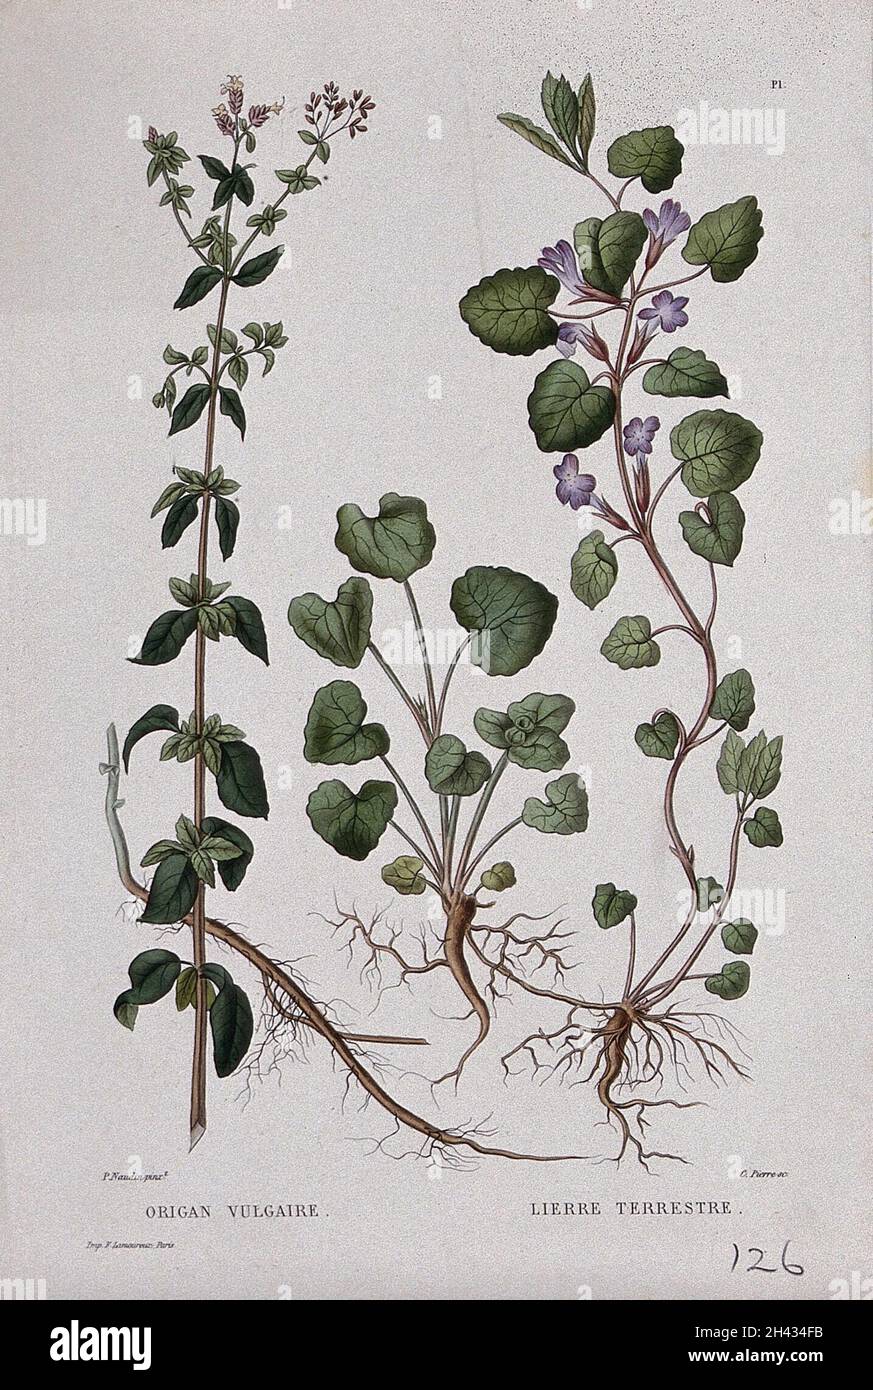 Oregano (Origanum vulgare) and ground ivy (Glechoma hederacea): entire flowering plants. Coloured etching by C. Pierre, c. 1865, after P. Naudin. Stock Photo